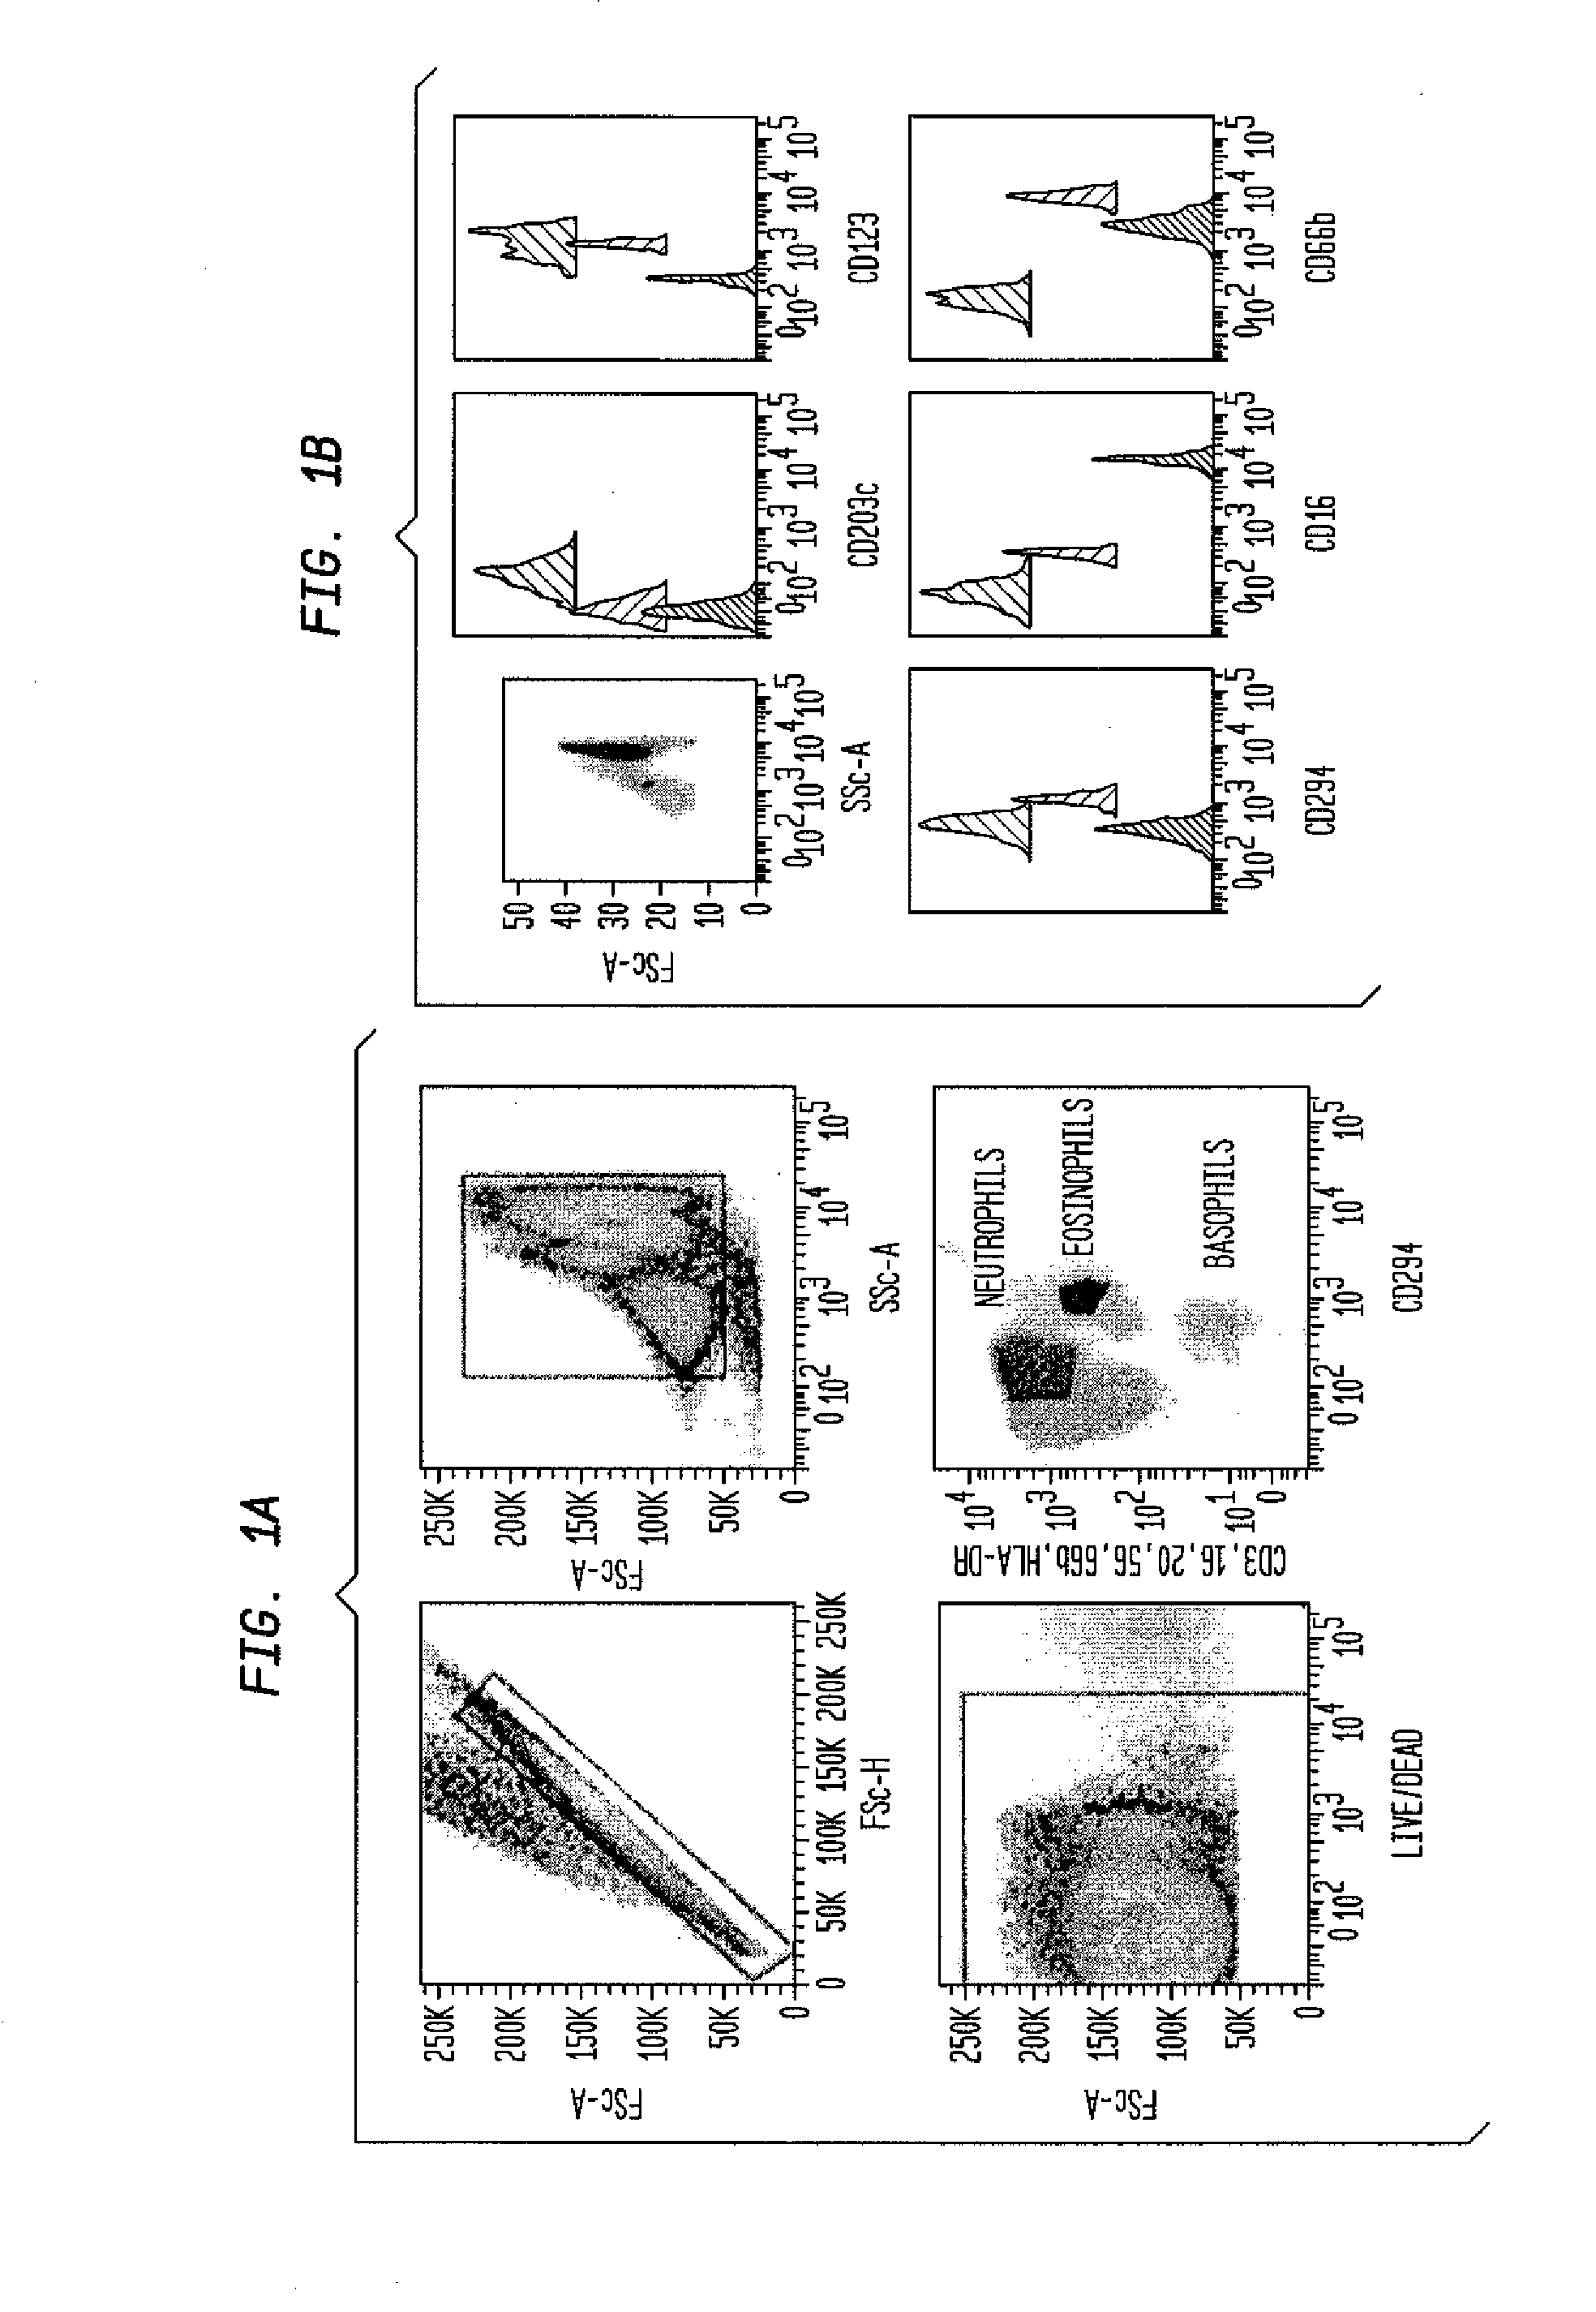 Methods and assays for detecting and quantifying pure subpopulations of white blood cells in immune system disorders